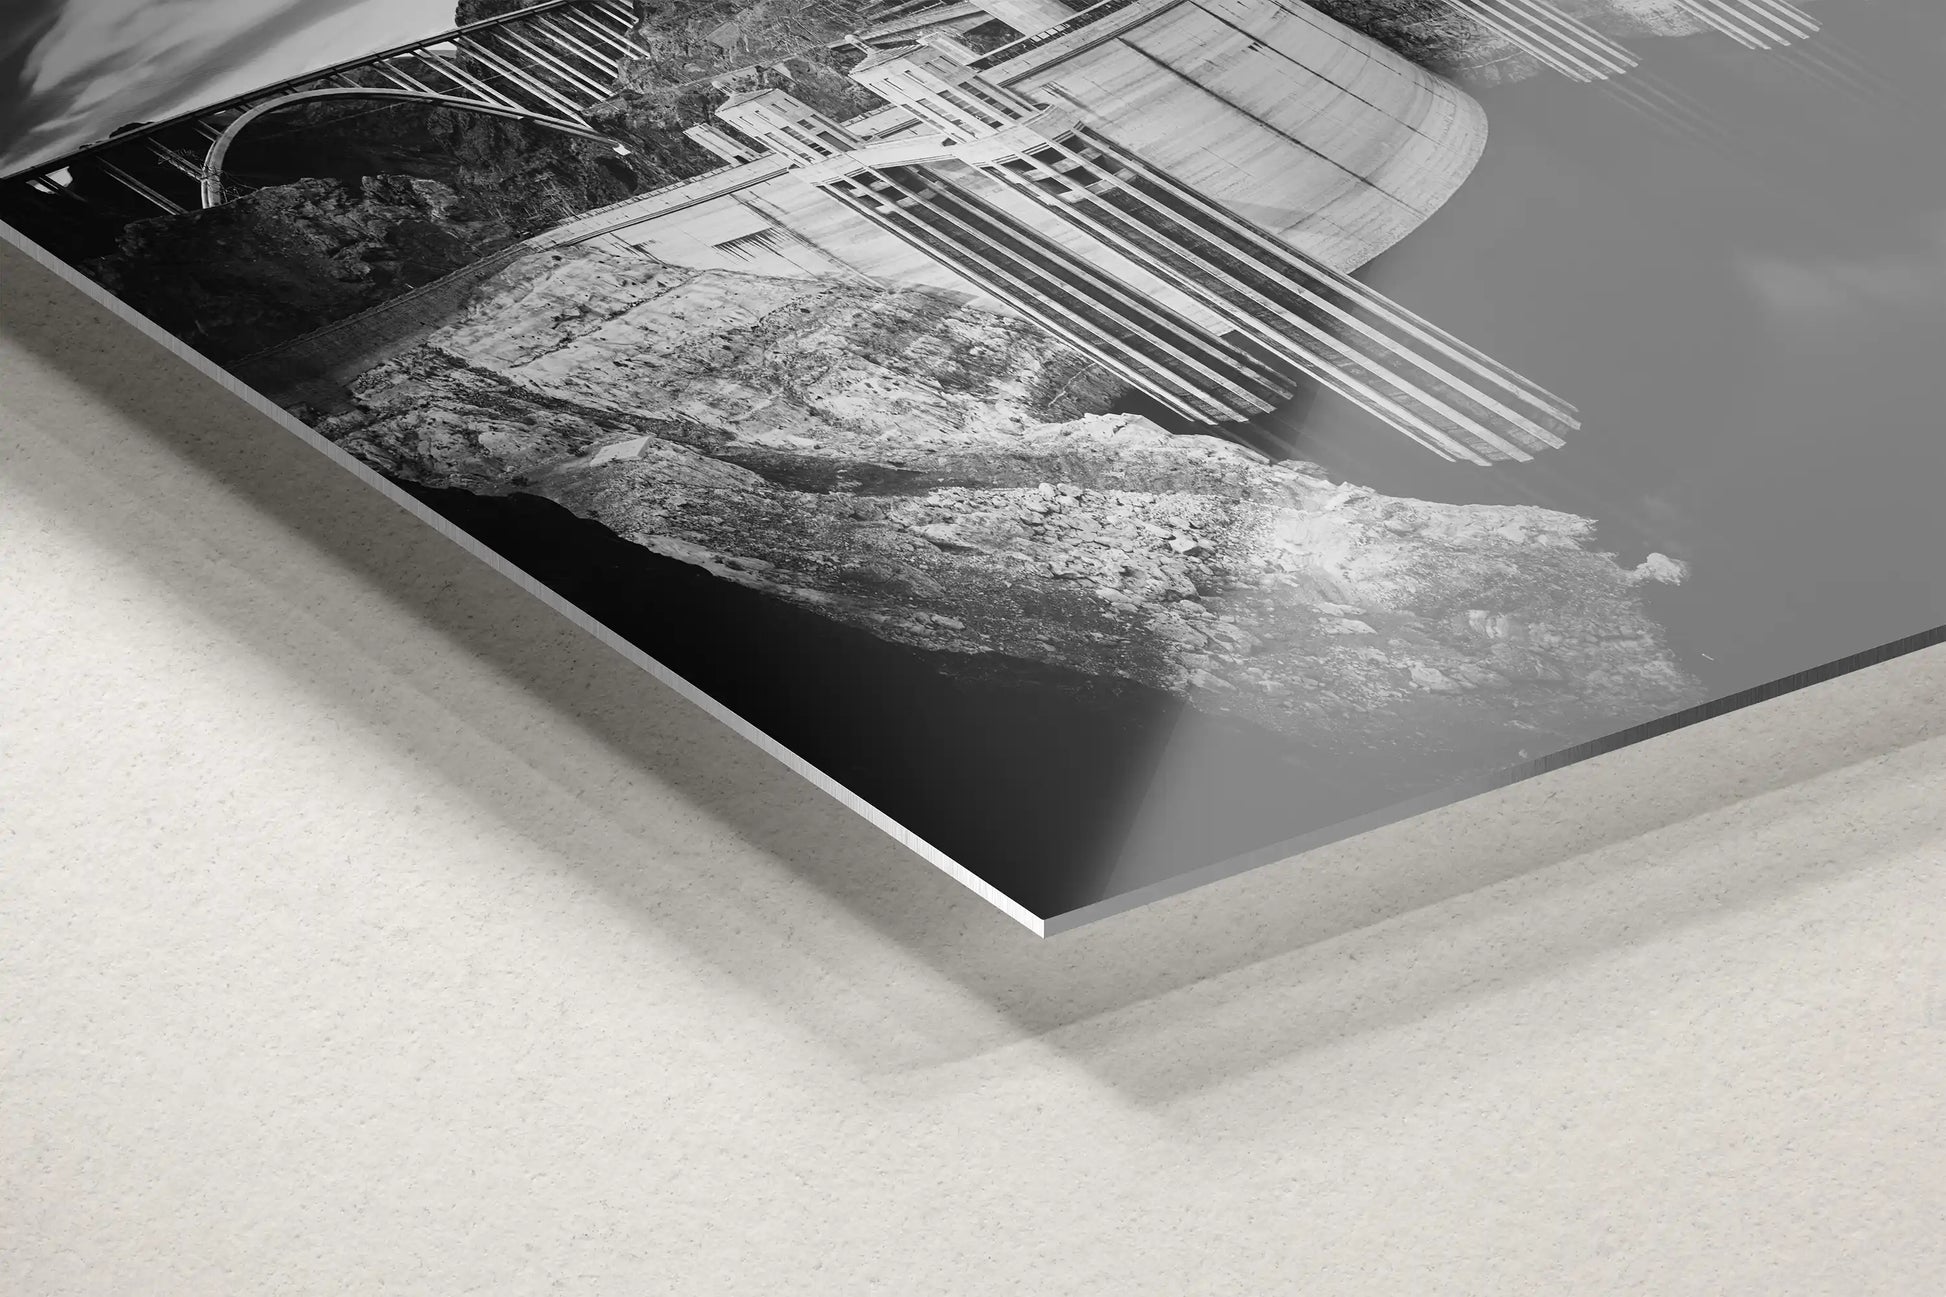 Detailed view of a metal decor piece featuring a black and white image of Hoover Dam, highlighting the sleek finish and modern aesthetic.